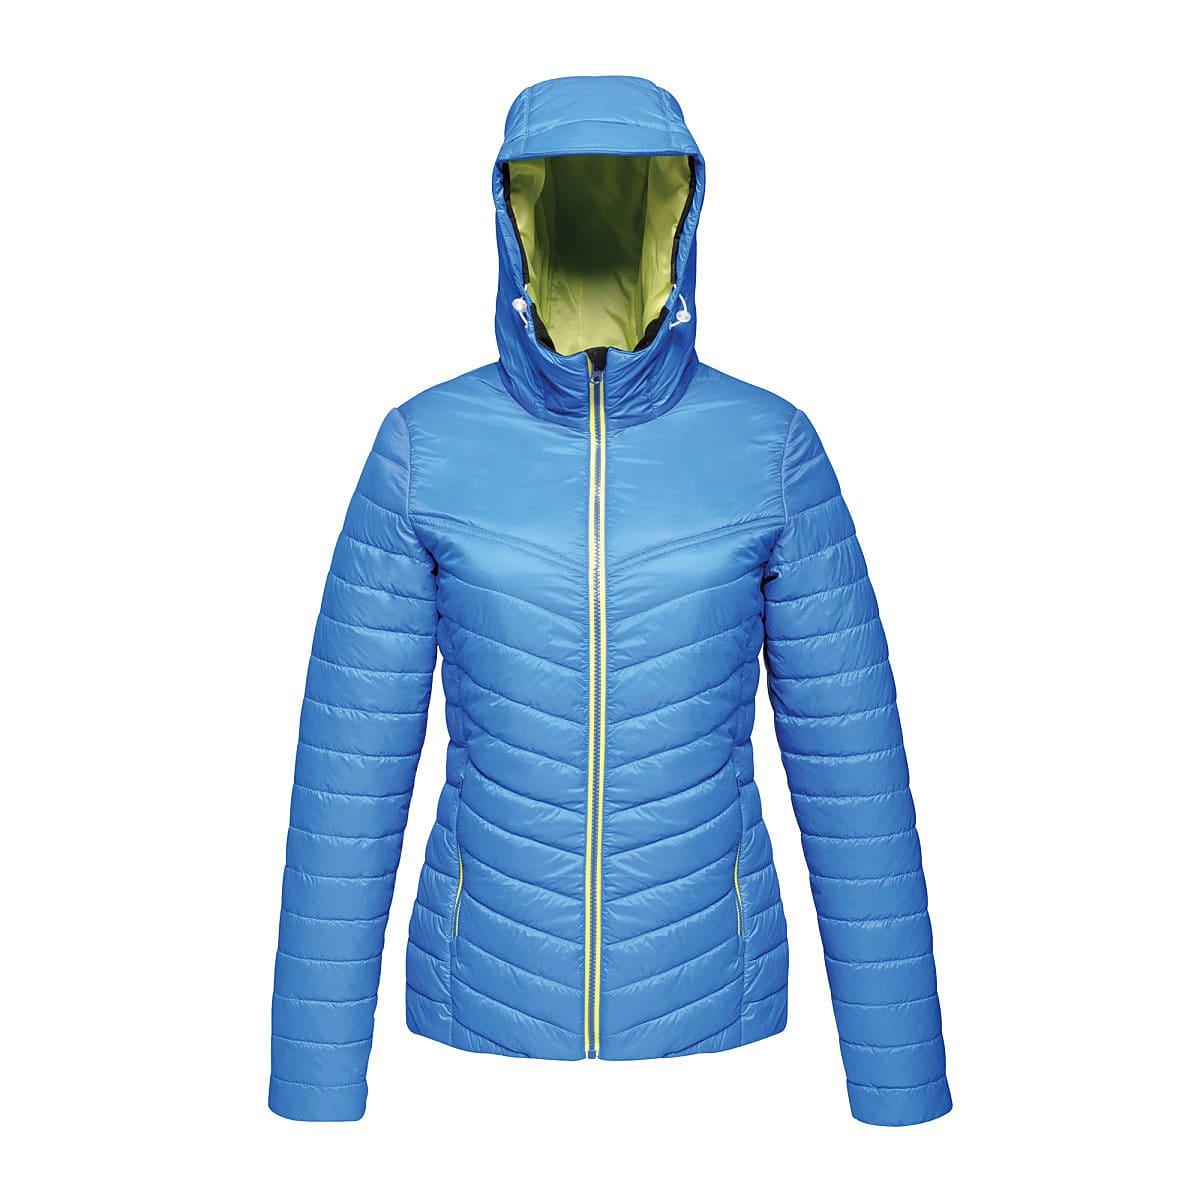 Regatta Womens Acadia II Jacket in Oxford Blue / Neon Spring (Product Code: TRA421)